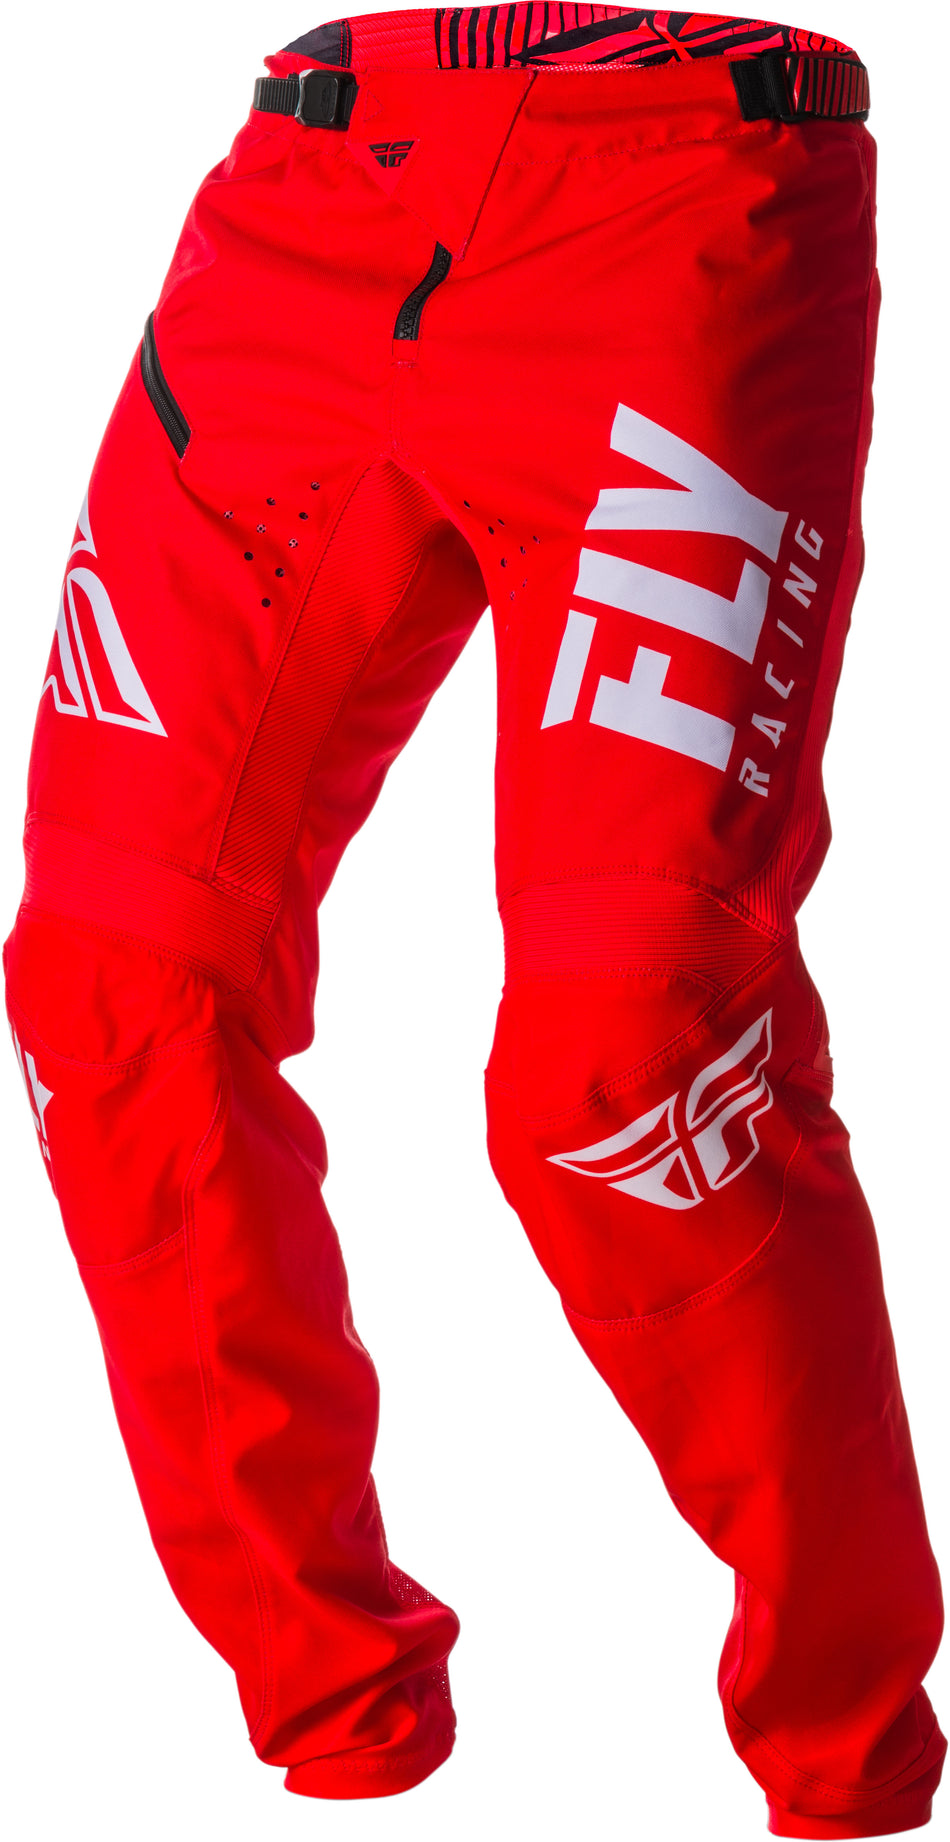 FLY RACING Kinetic Shield Bicycle Pants Red/White Sz 32 372-02232